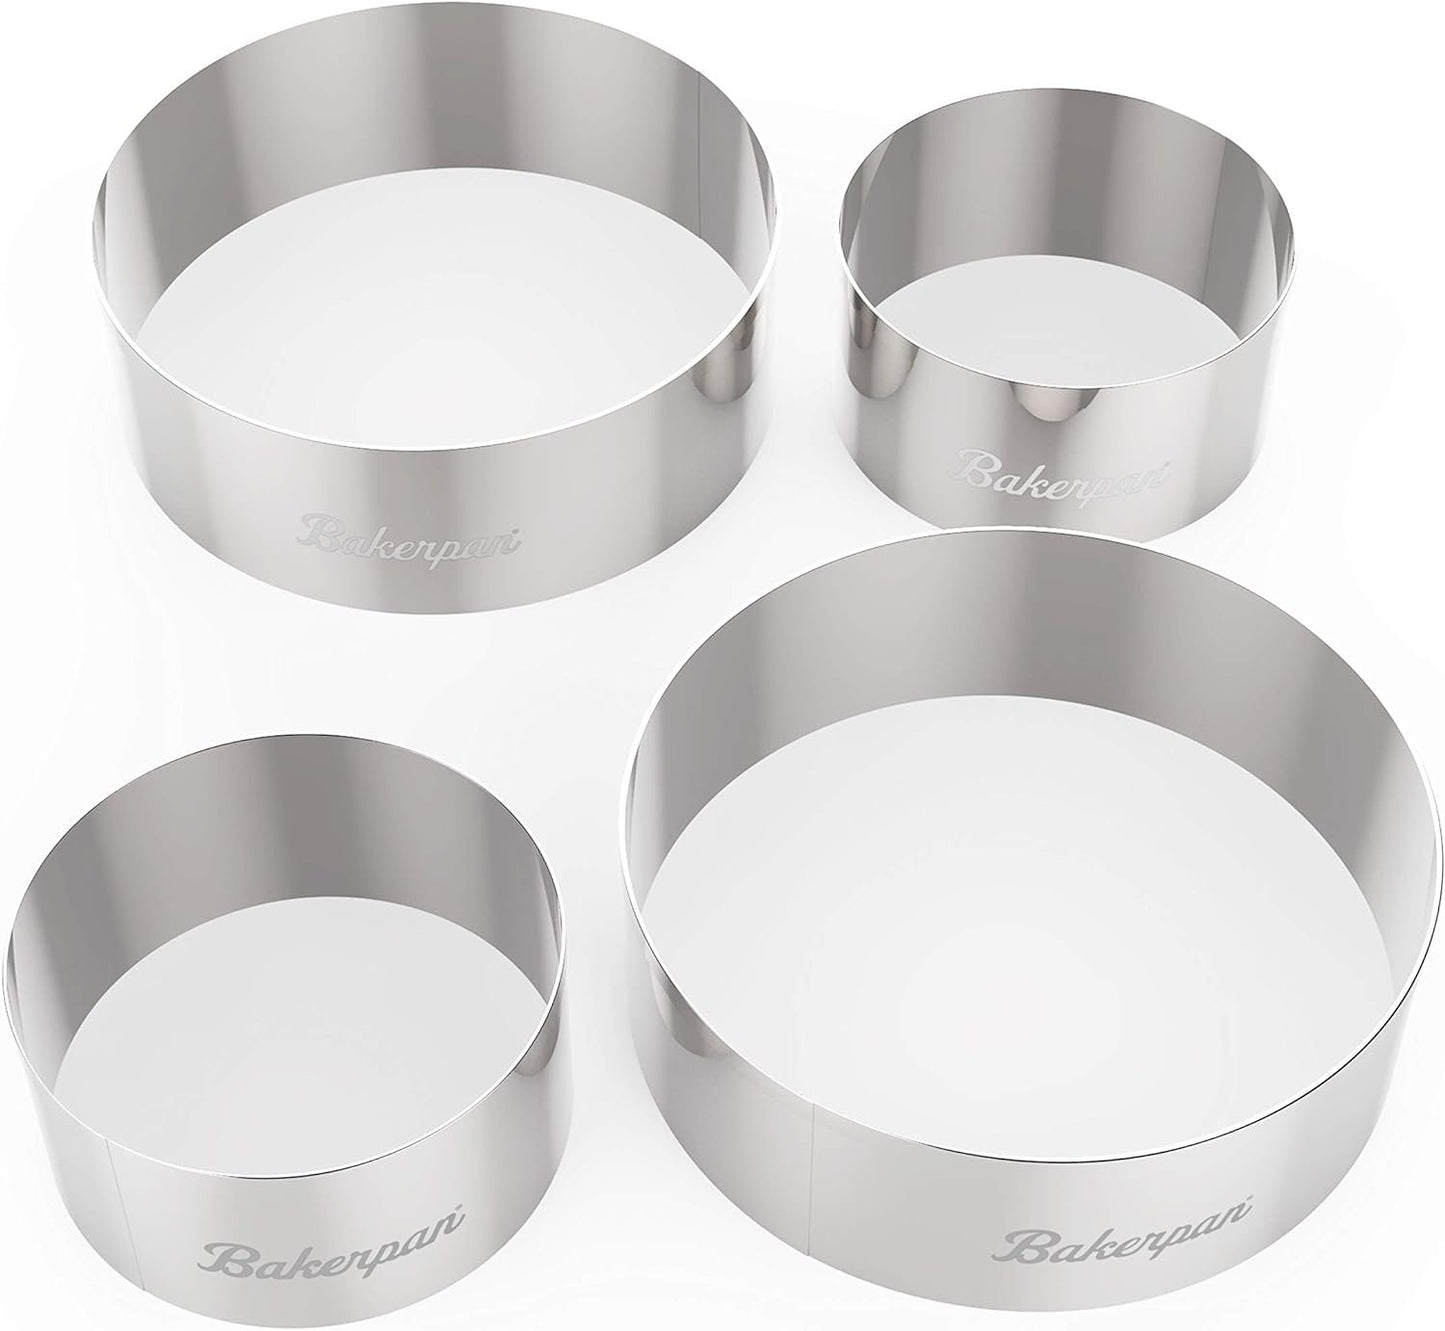 Bakerpan Stainless Steel Round Cookie Cutter Set, Circle Biscuit Cutters - 2" & 3"